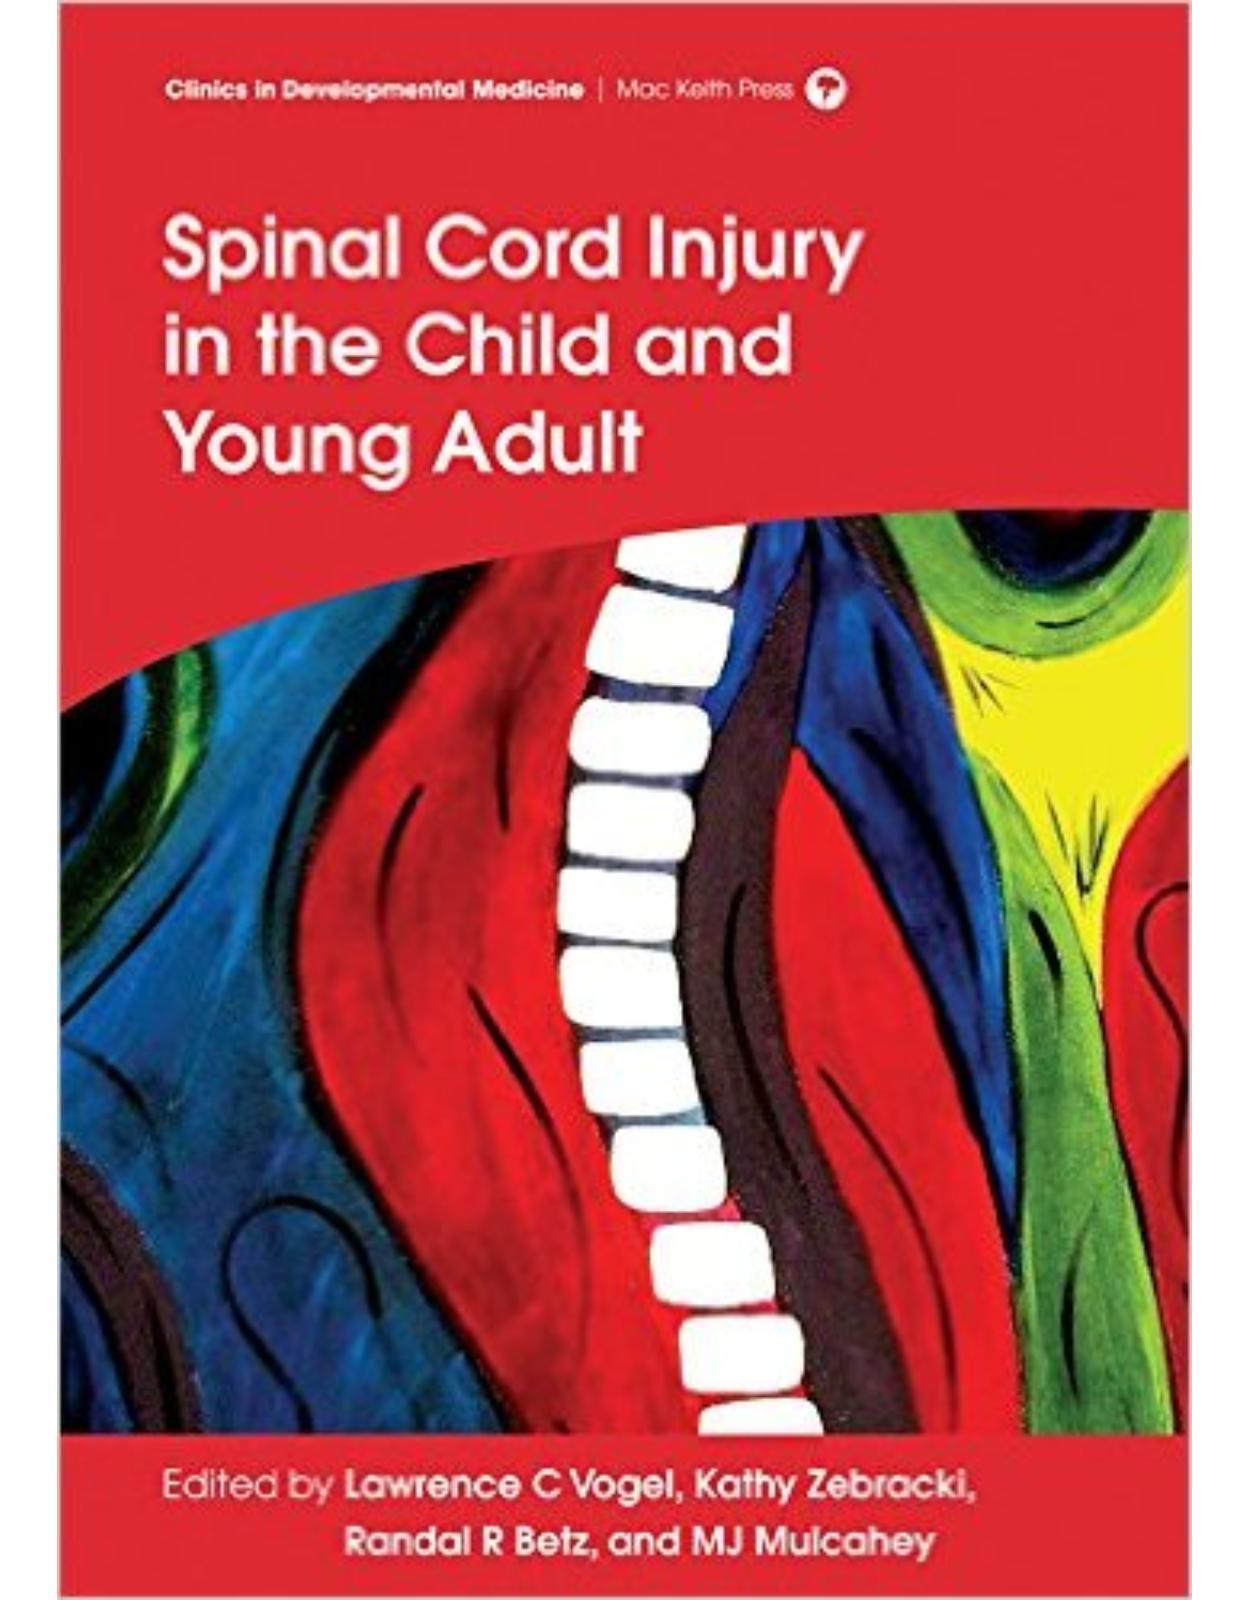 Spinal Cord Injury in the Child and Young Adult (Clinics in Developmental Medicine) 1st Edition